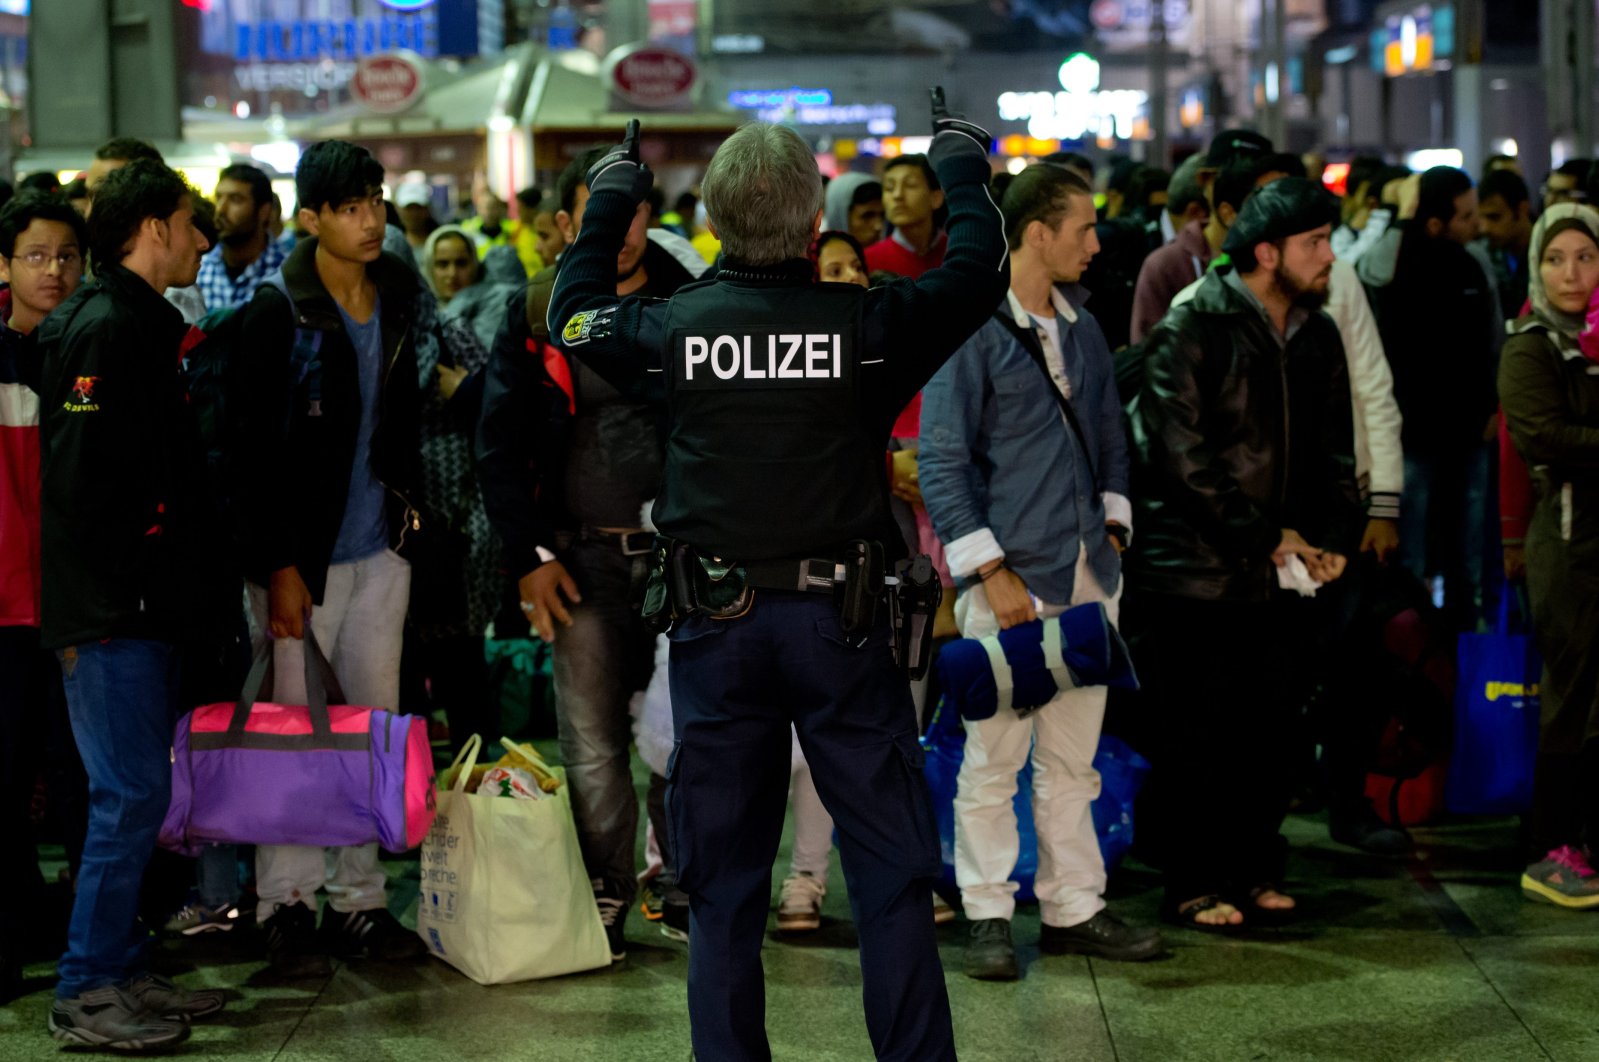 Refugees and migrants arrive at the central station in Munich, southern Germany, Sept. 13, 2015. (AP Photo)